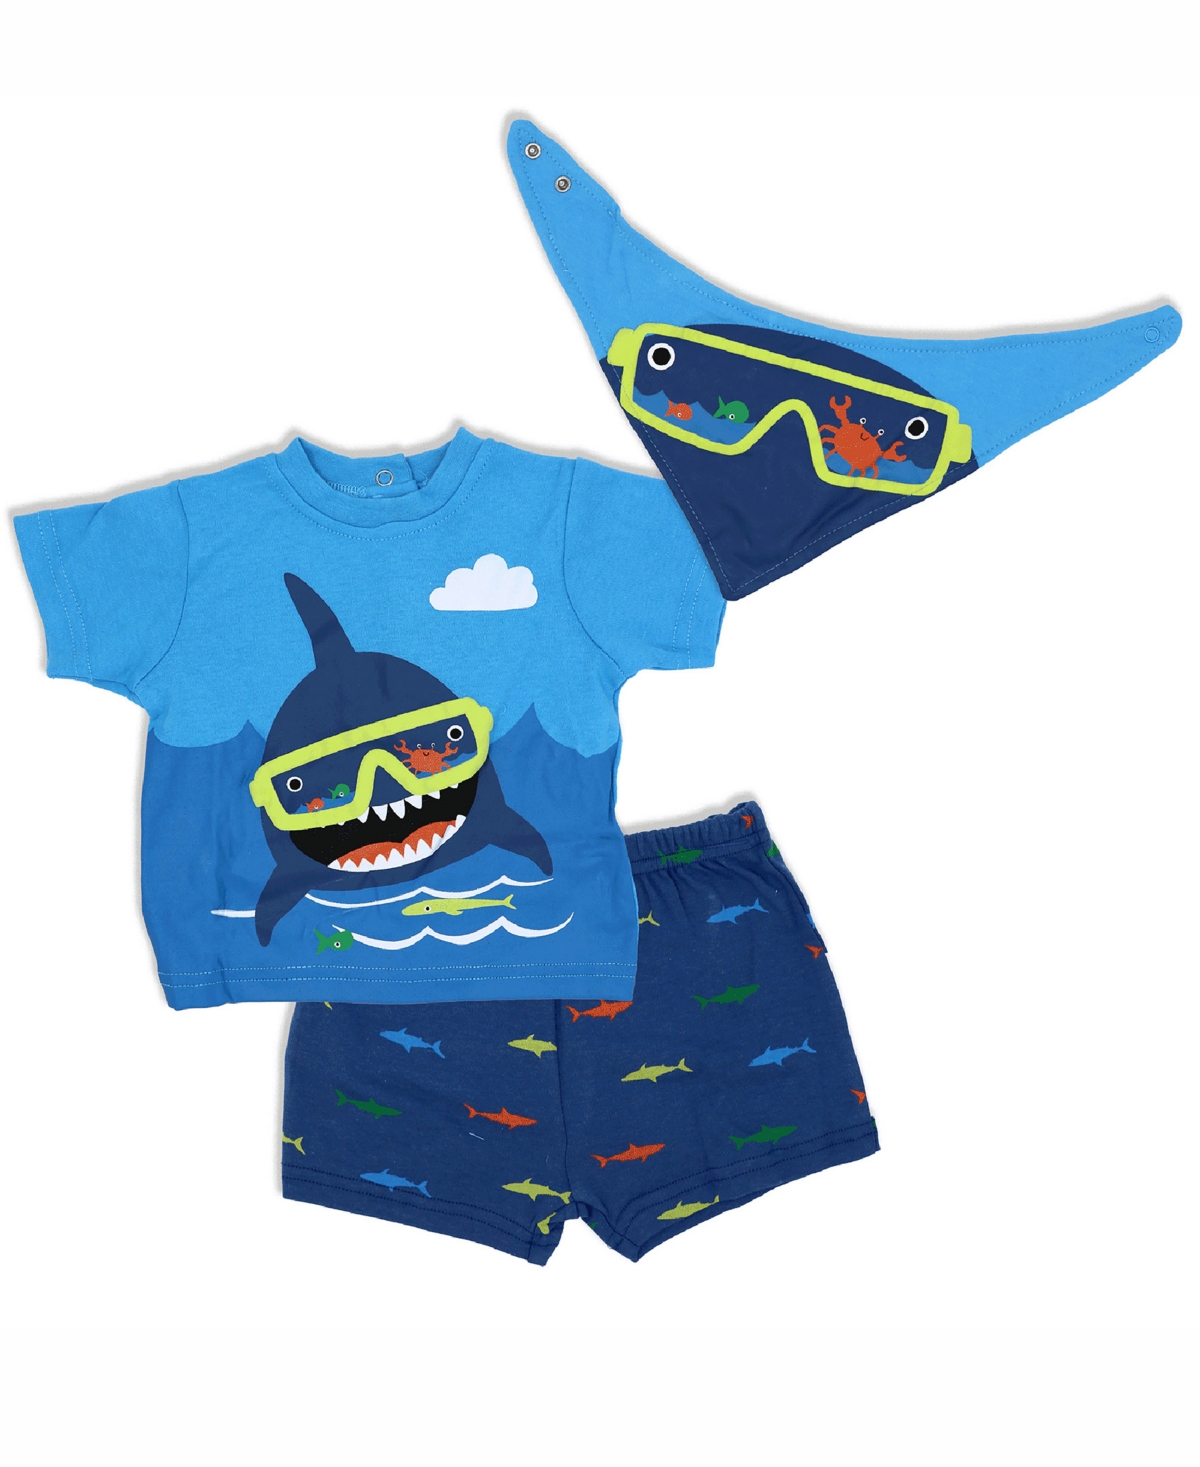 Lily & Jack Baby Boys Shark Shorts, T Shirt And Bib, 3 Piece Set In Blue